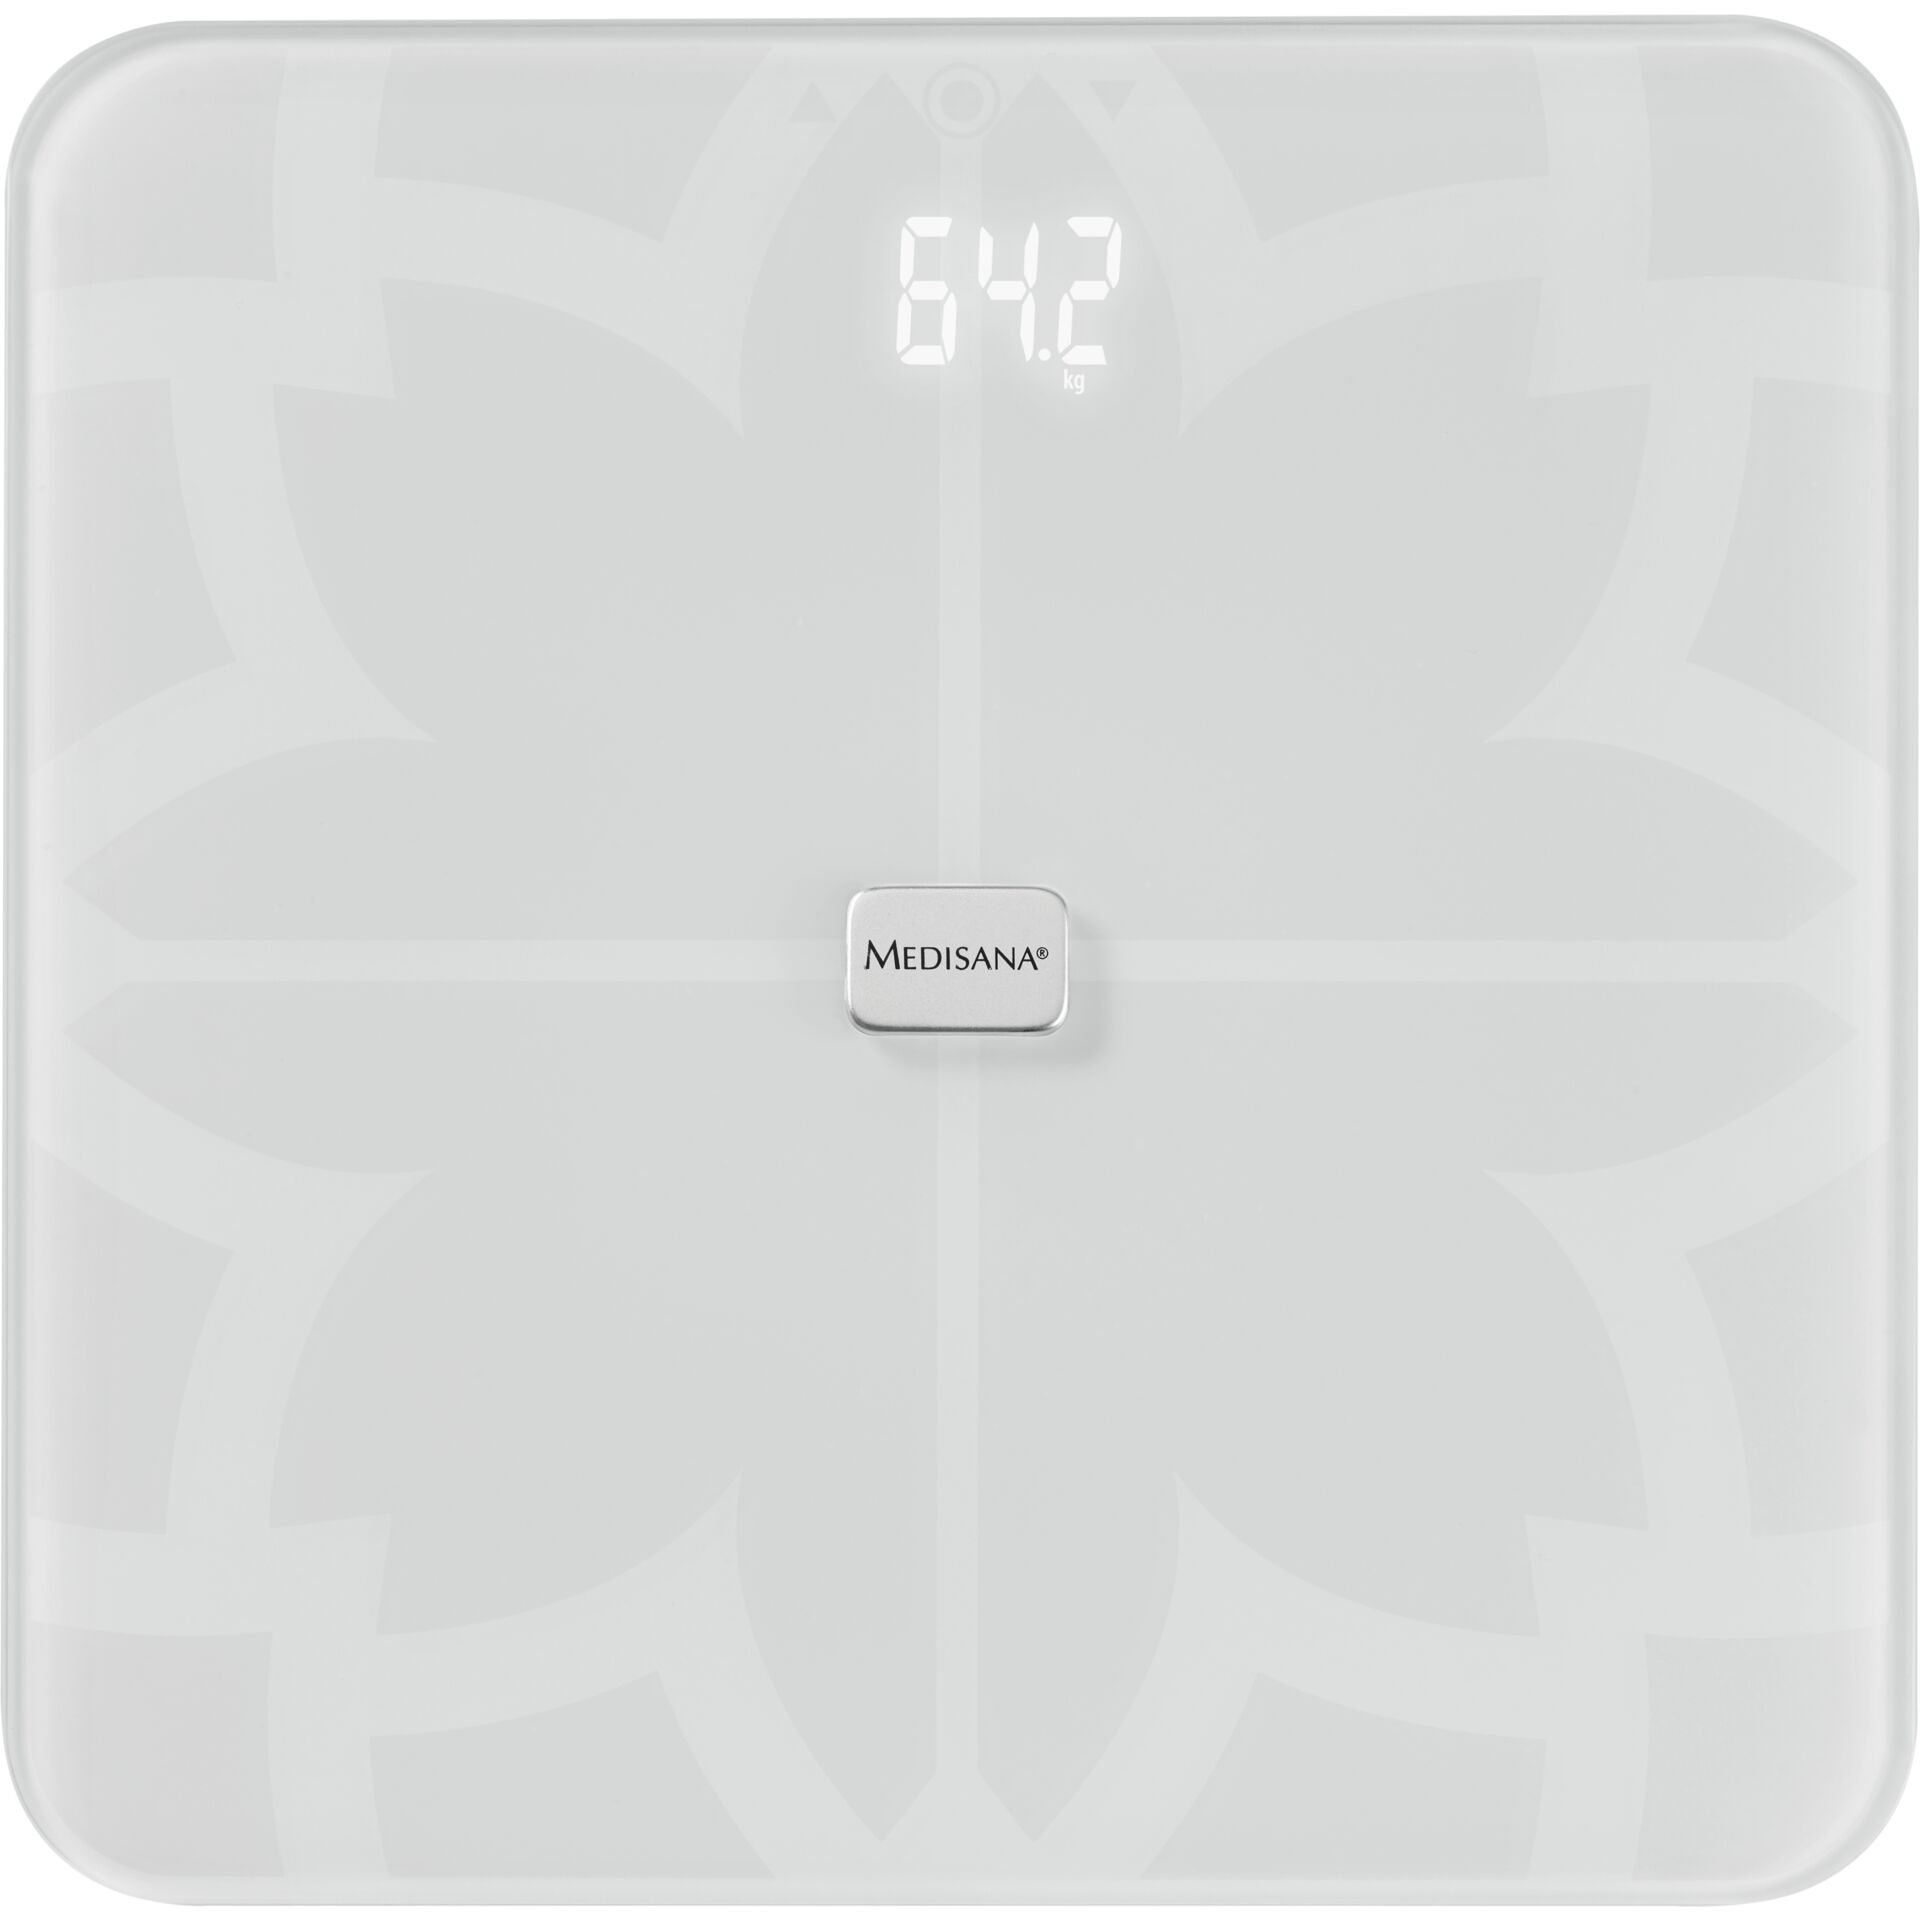 Medisana BS 450 connect Body Analysis Scale white